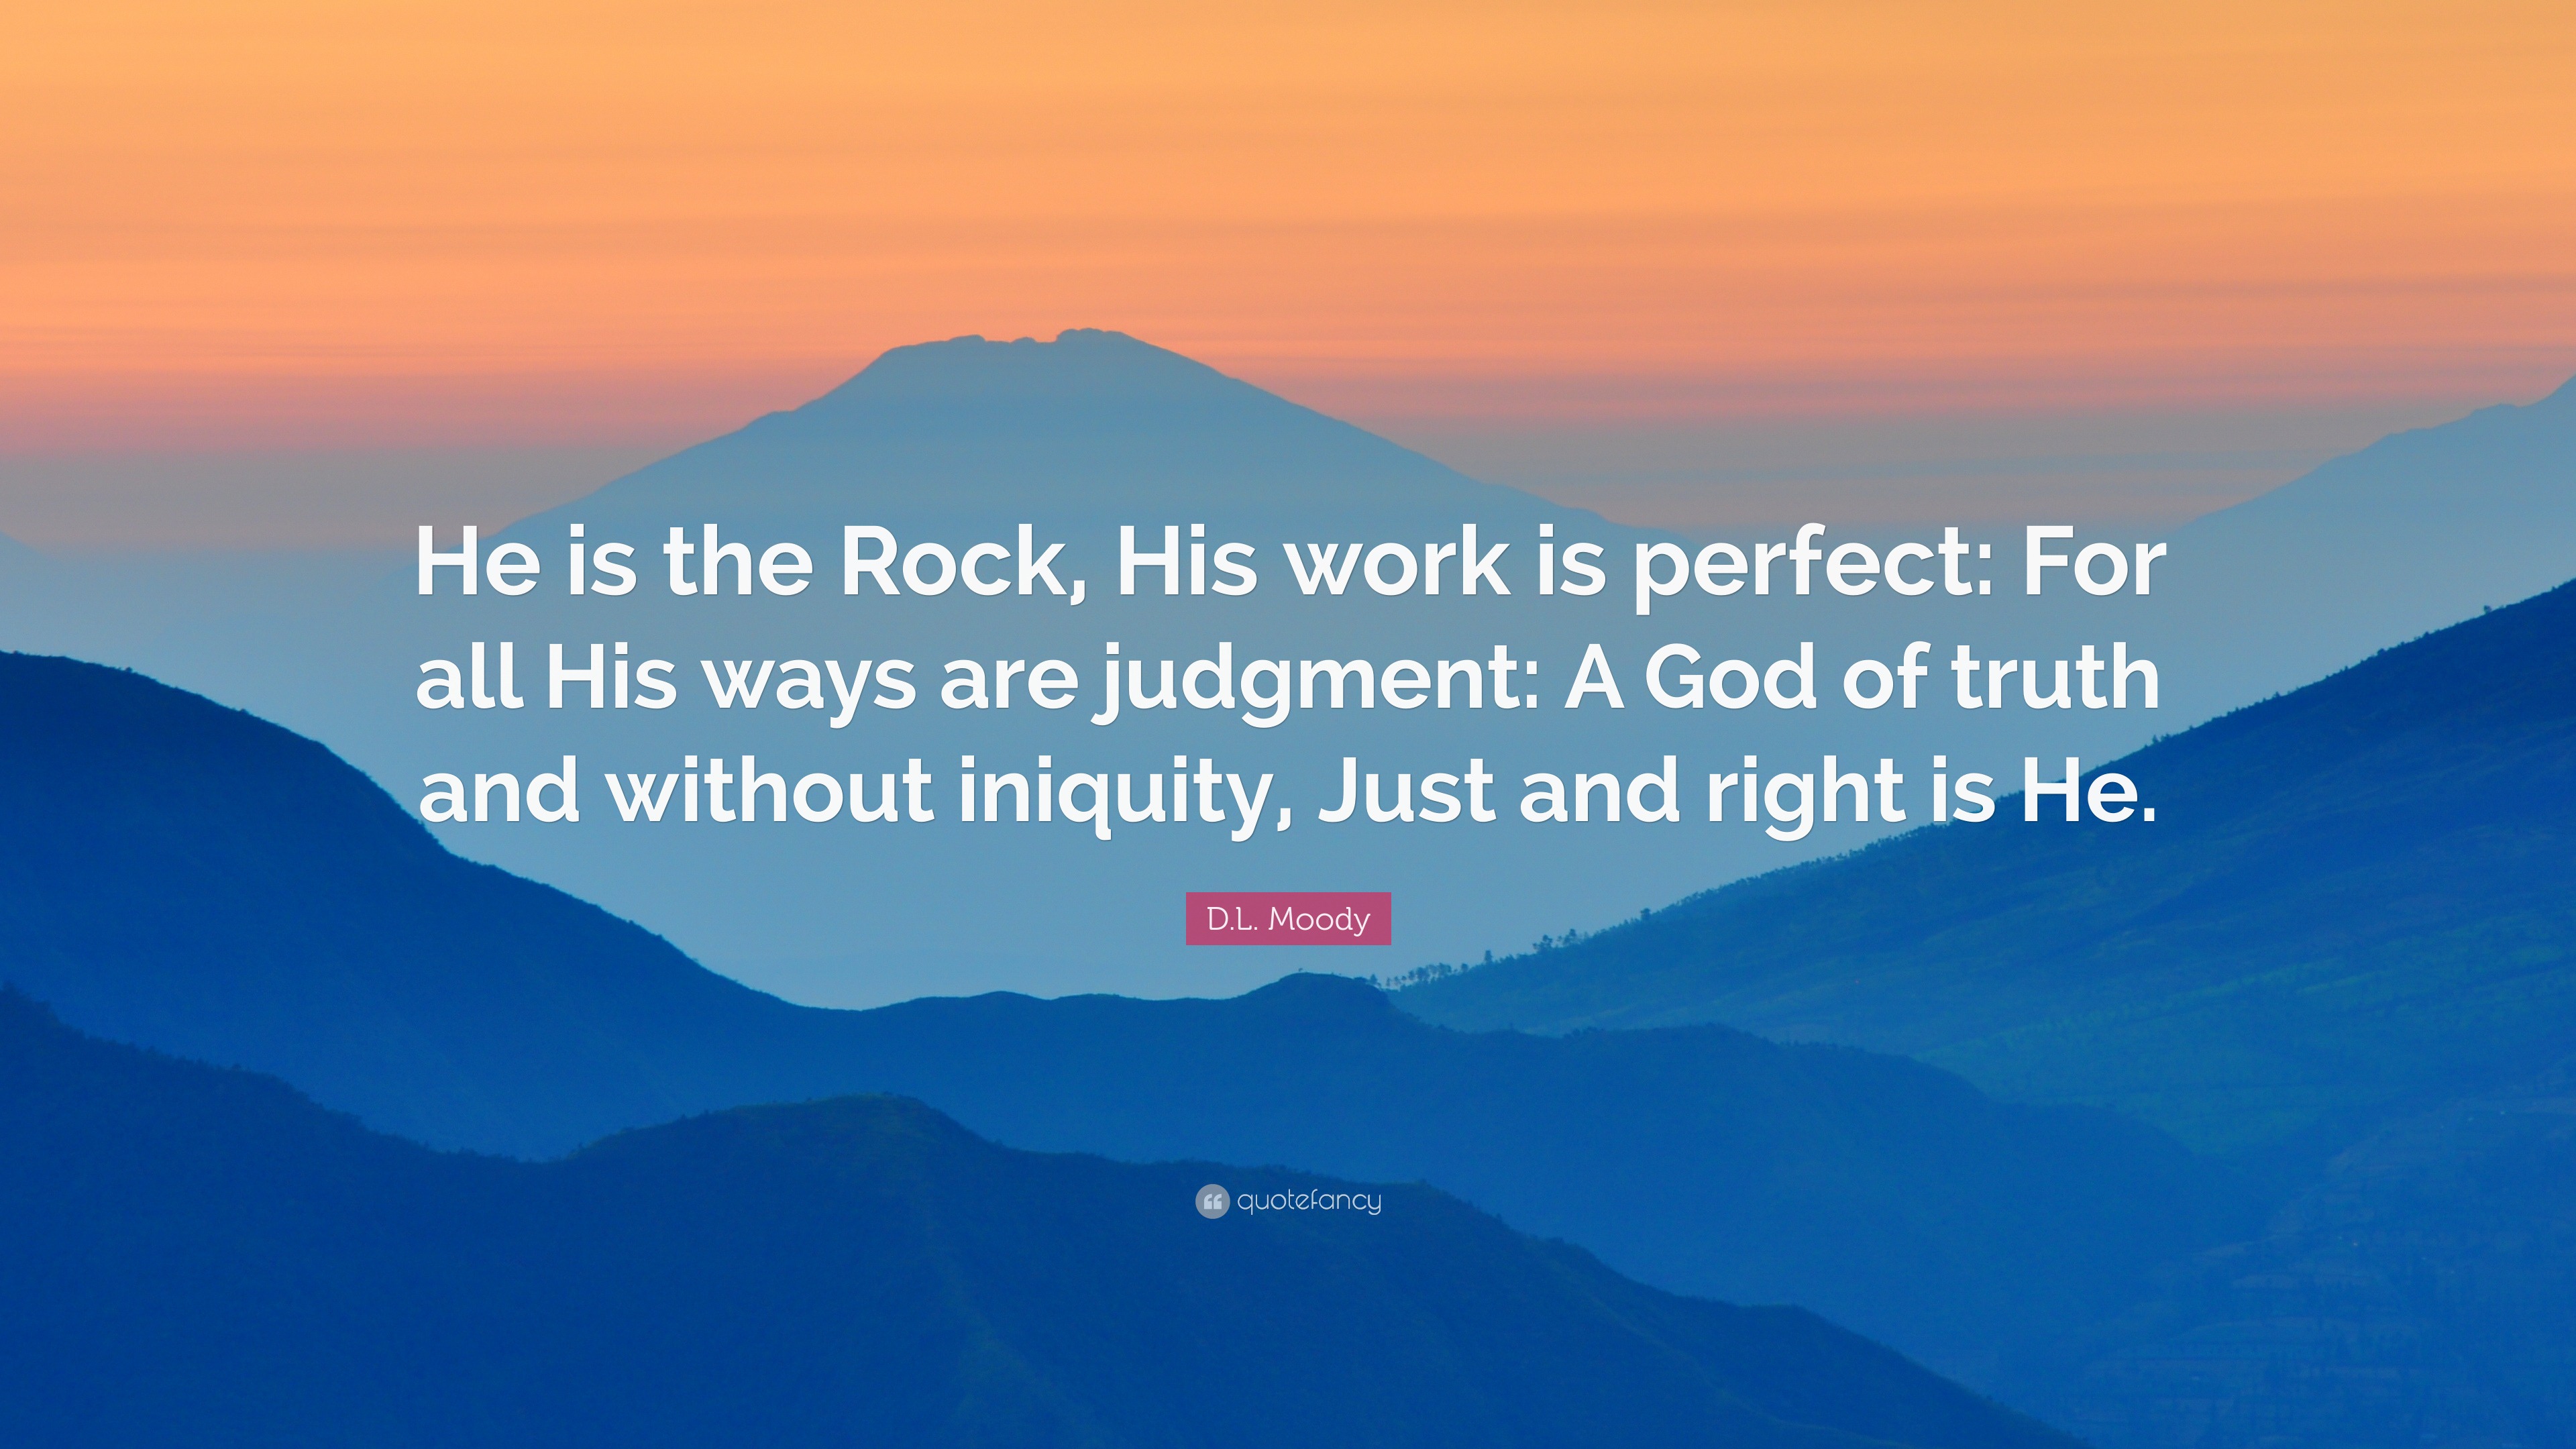 D.L. Moody Quote: "He is the Rock, His work is perfect ...